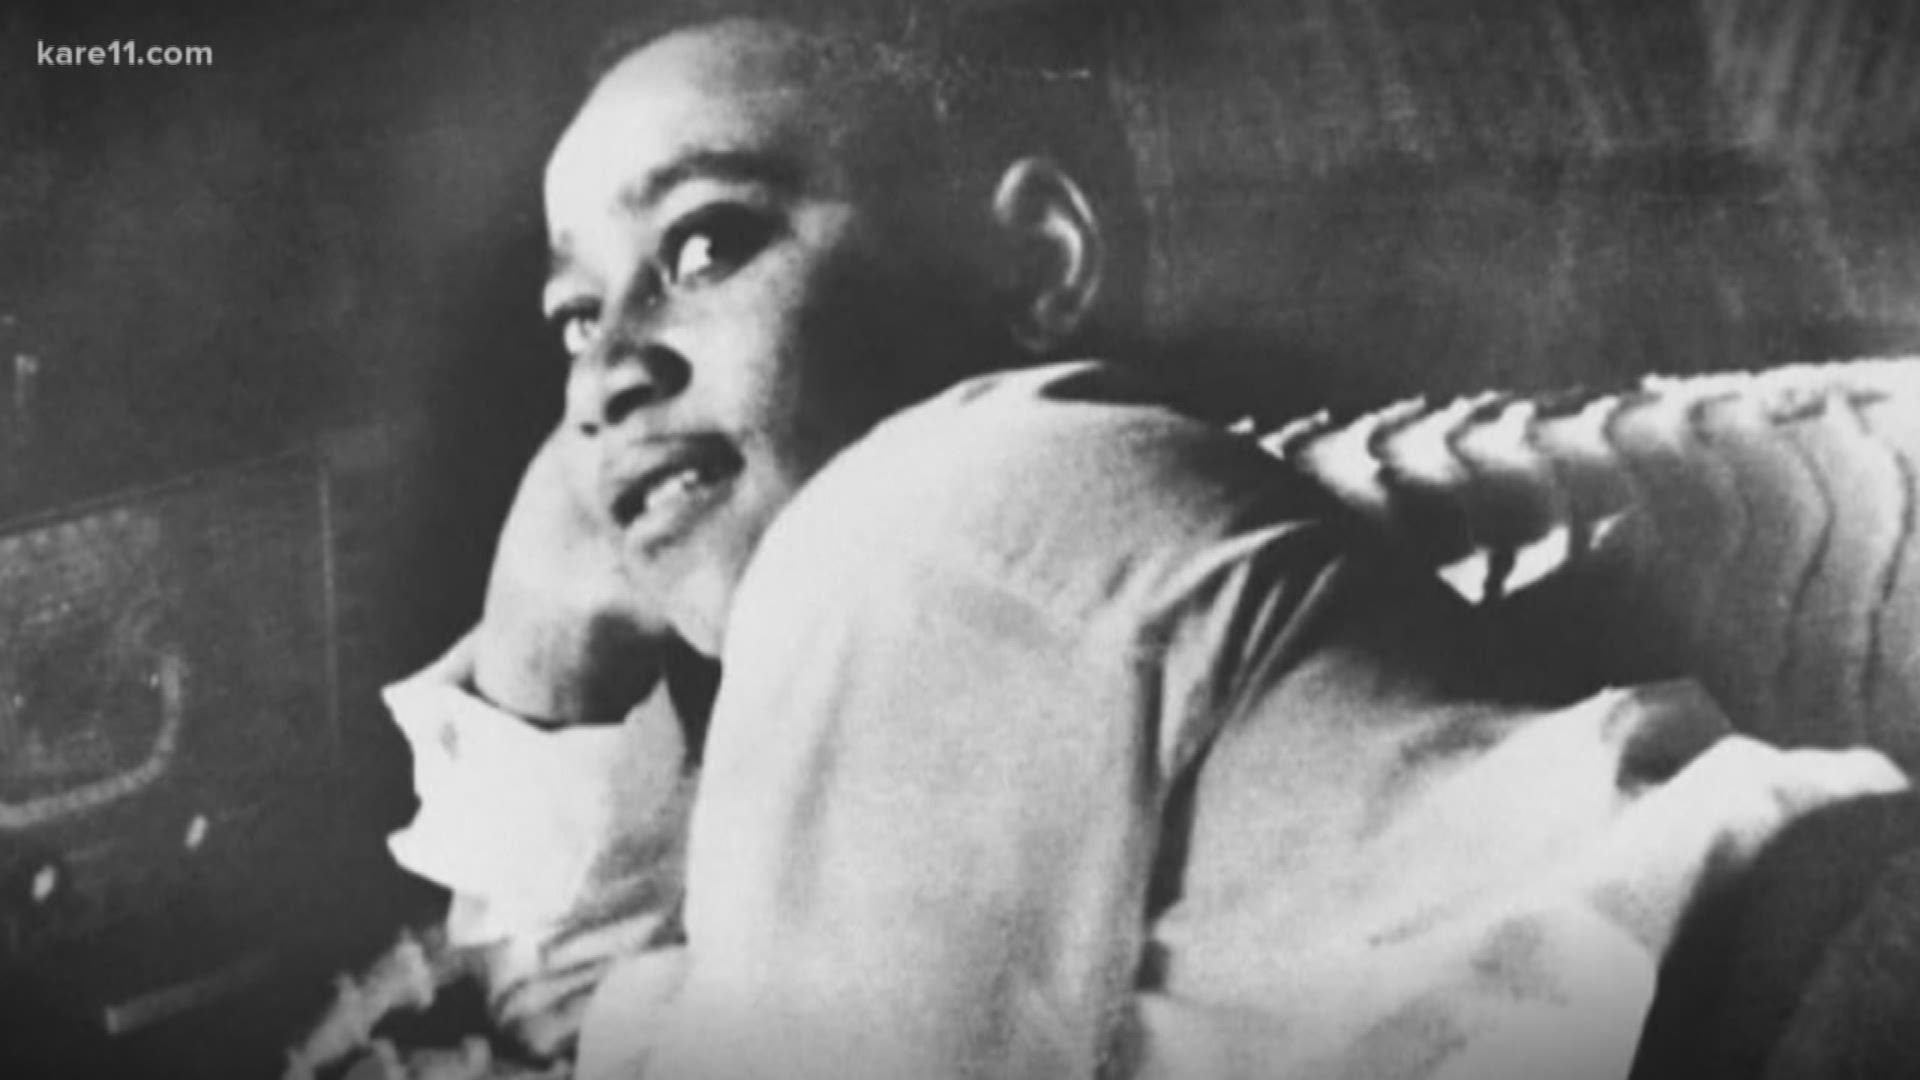 Government reopens probe of Till slaying, which inspired civil rights movement